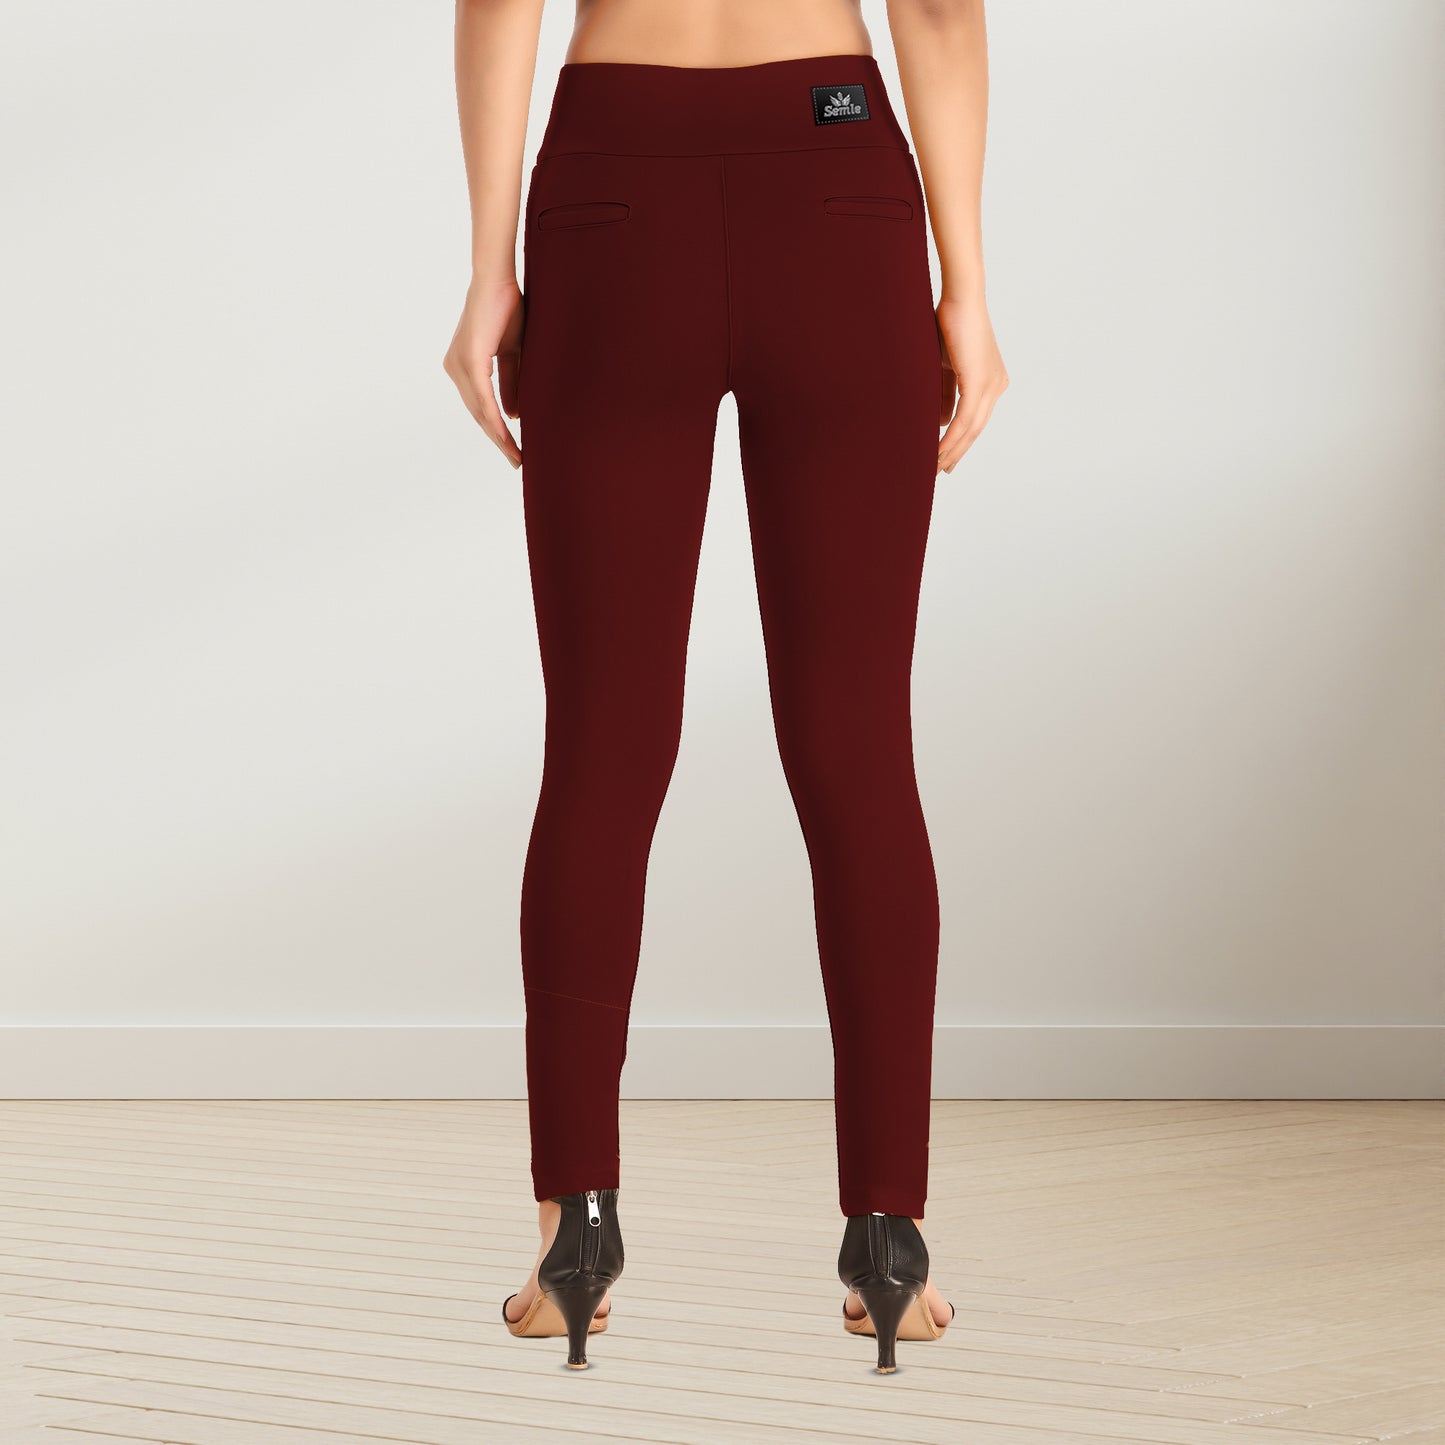 Comfortable Women's Mid-Waist Jeggings with 2 Front Pockets - Maroon